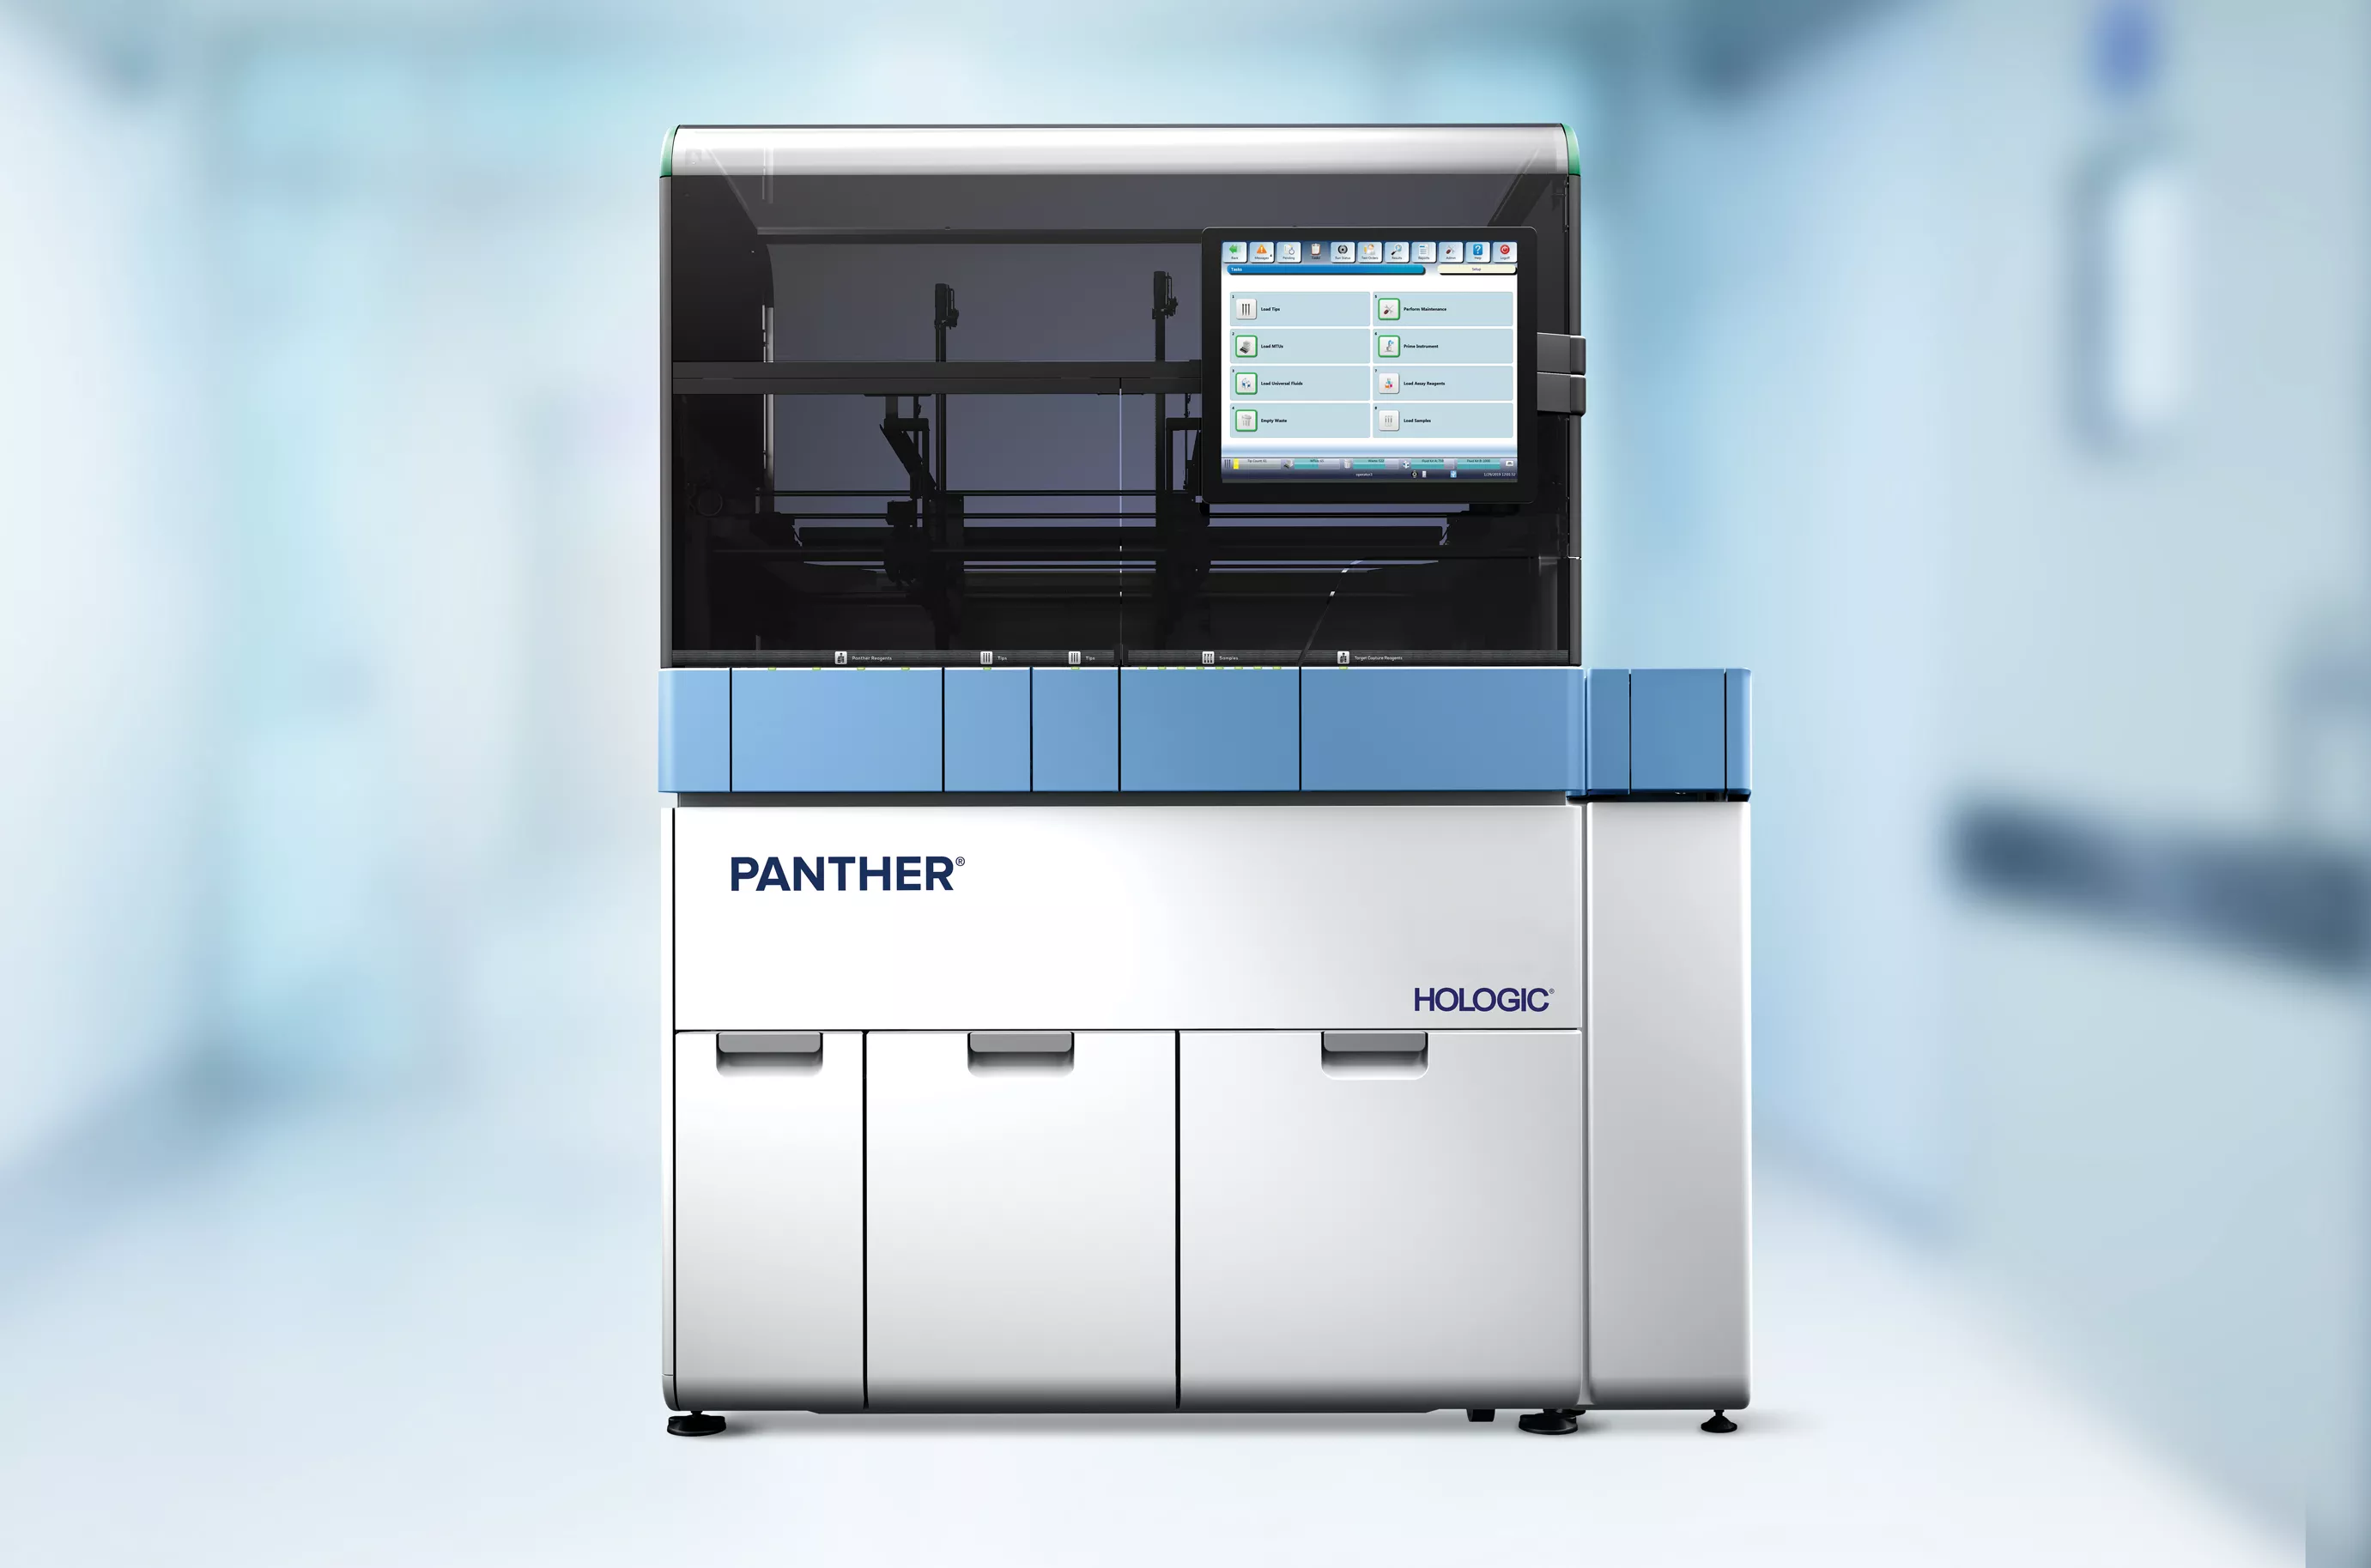 Image of Panther Plus in lab setting.